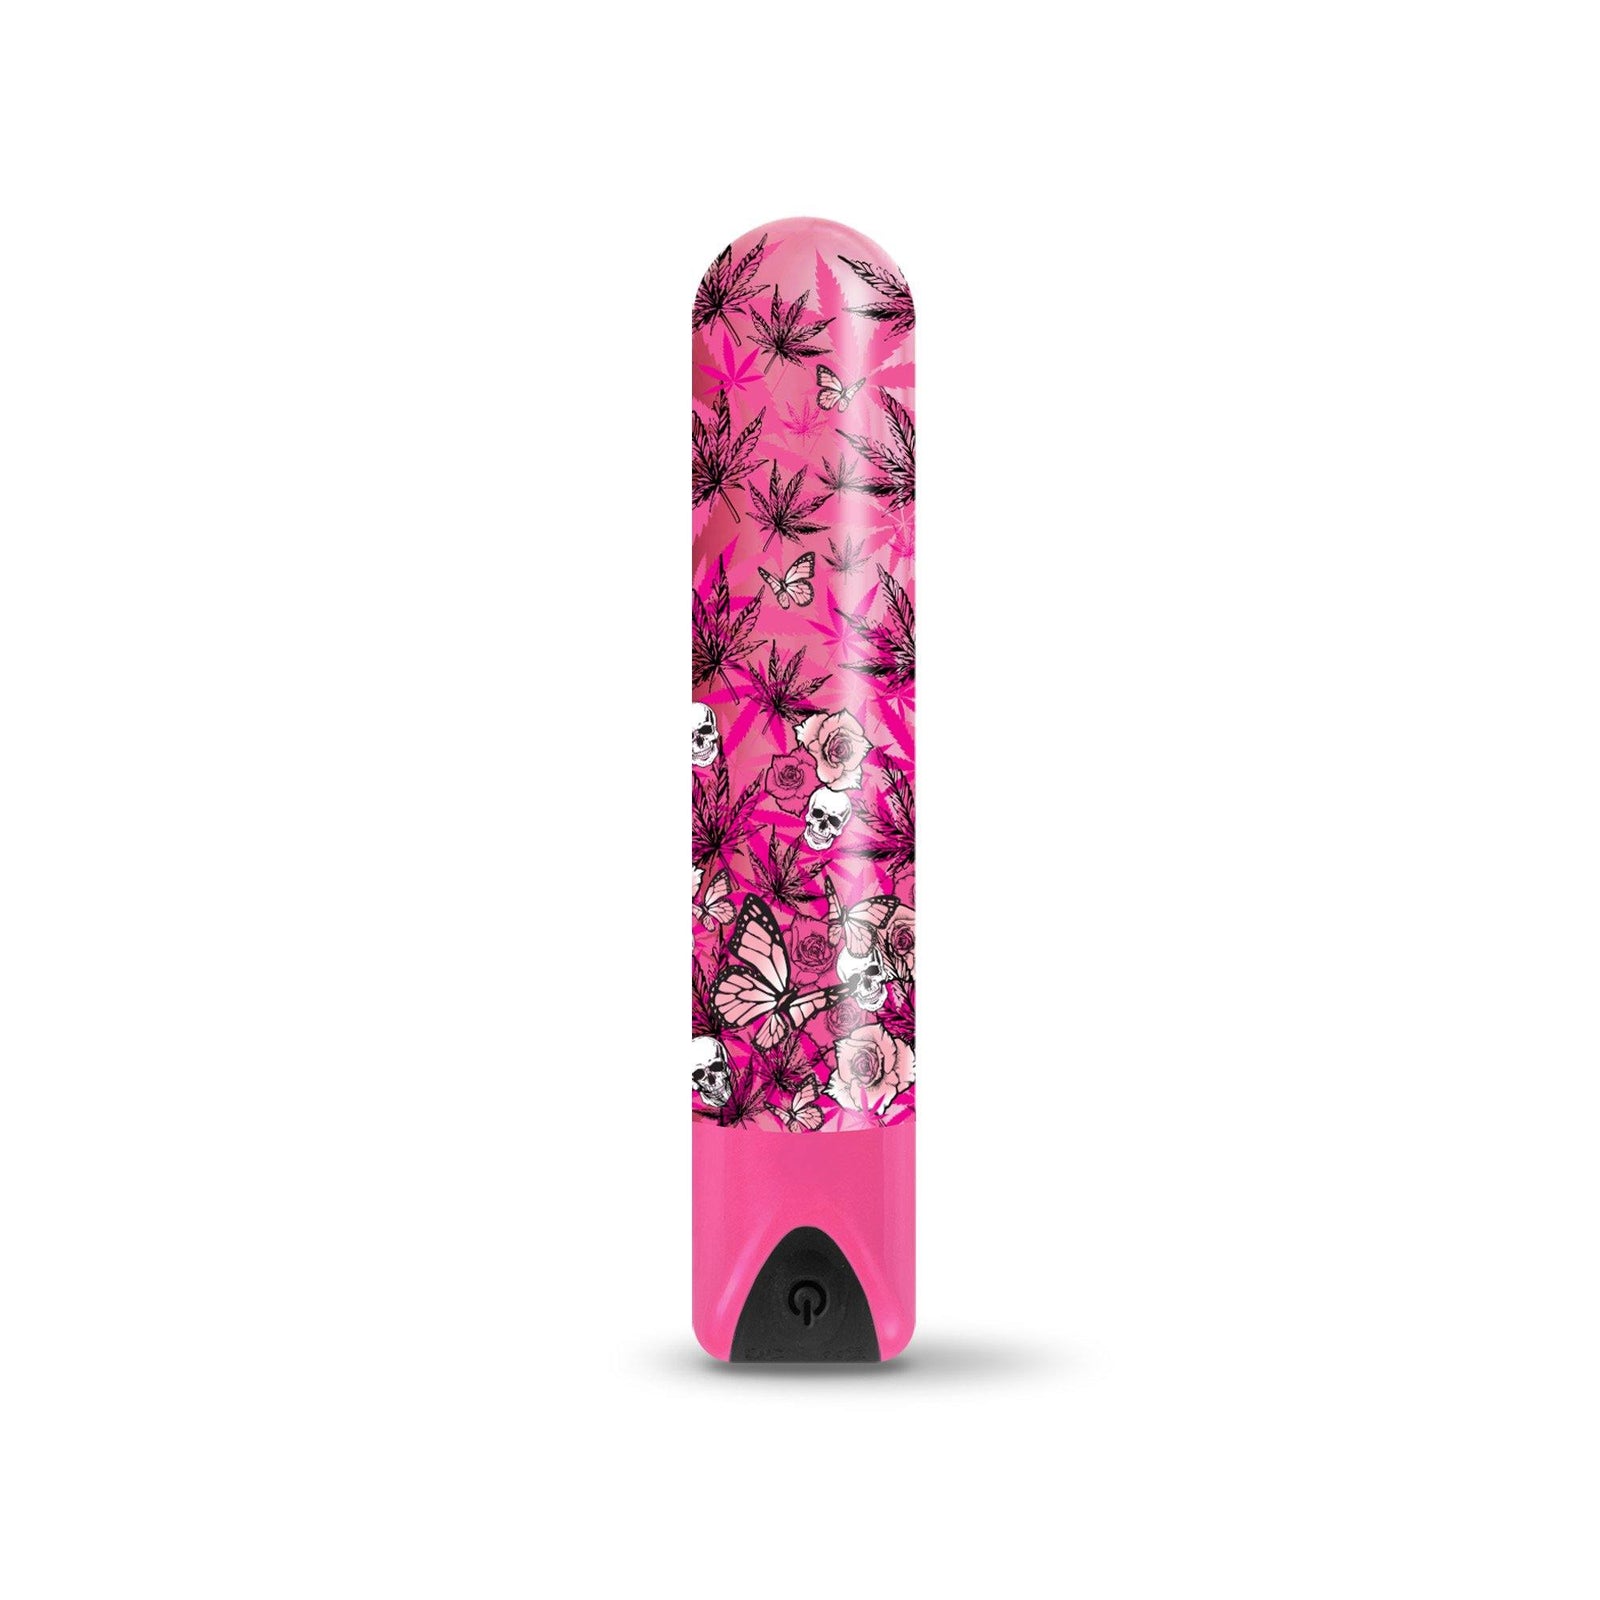 Prints Charming Buzzed Higher Power Rechargeable Bullet, Blazing Beauty w/storage bag - The Happy Ending Shop